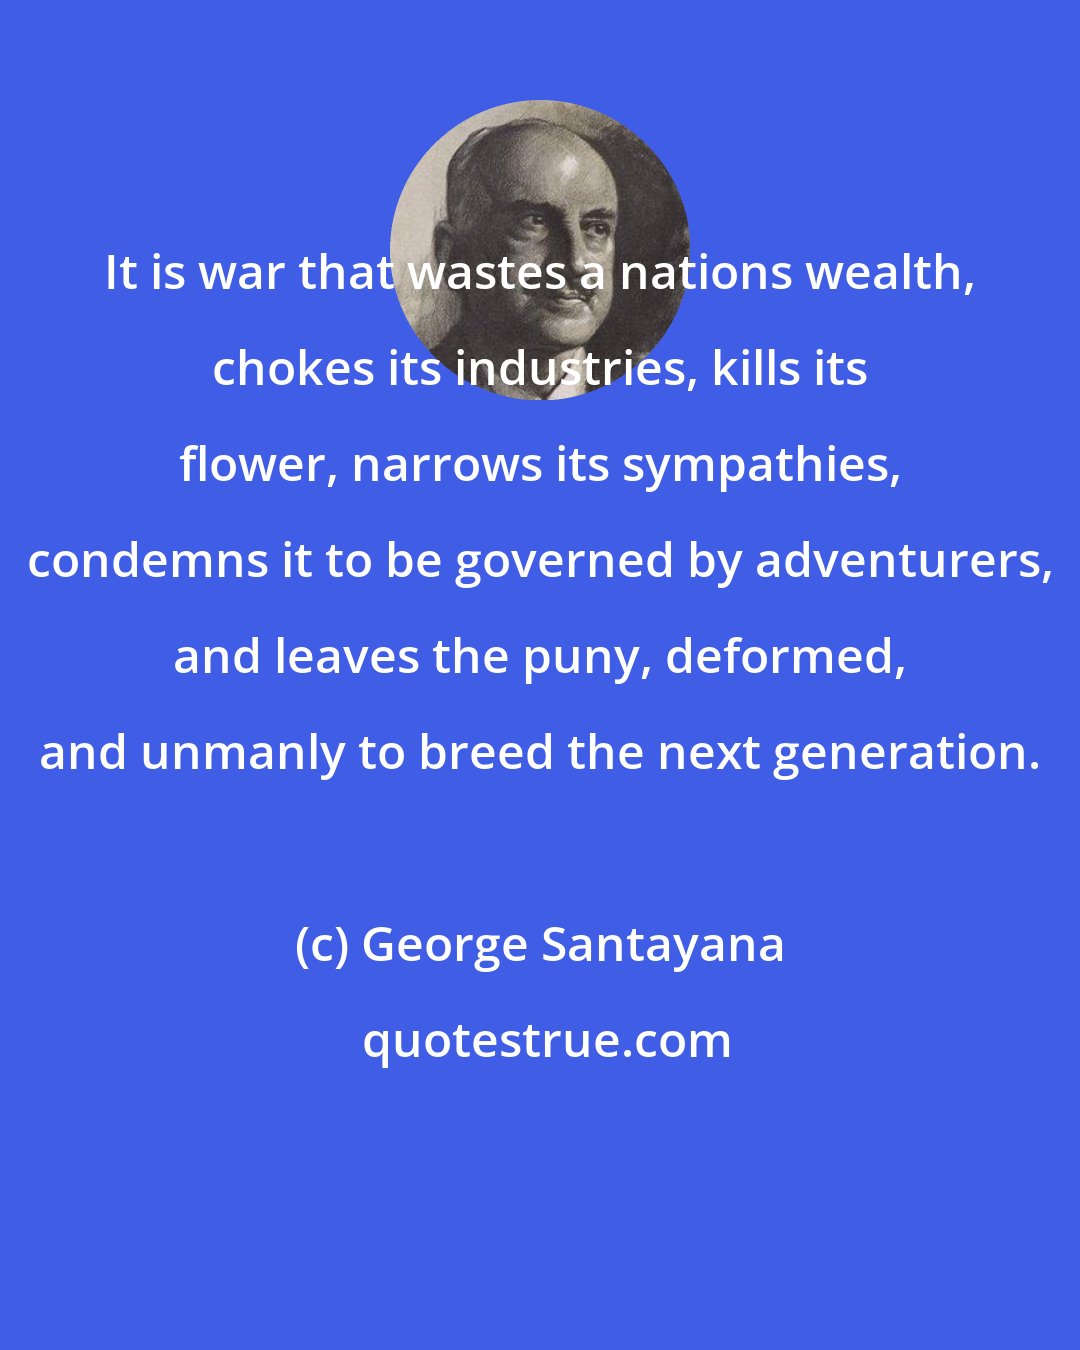 George Santayana: It is war that wastes a nations wealth, chokes its industries, kills its flower, narrows its sympathies, condemns it to be governed by adventurers, and leaves the puny, deformed, and unmanly to breed the next generation.